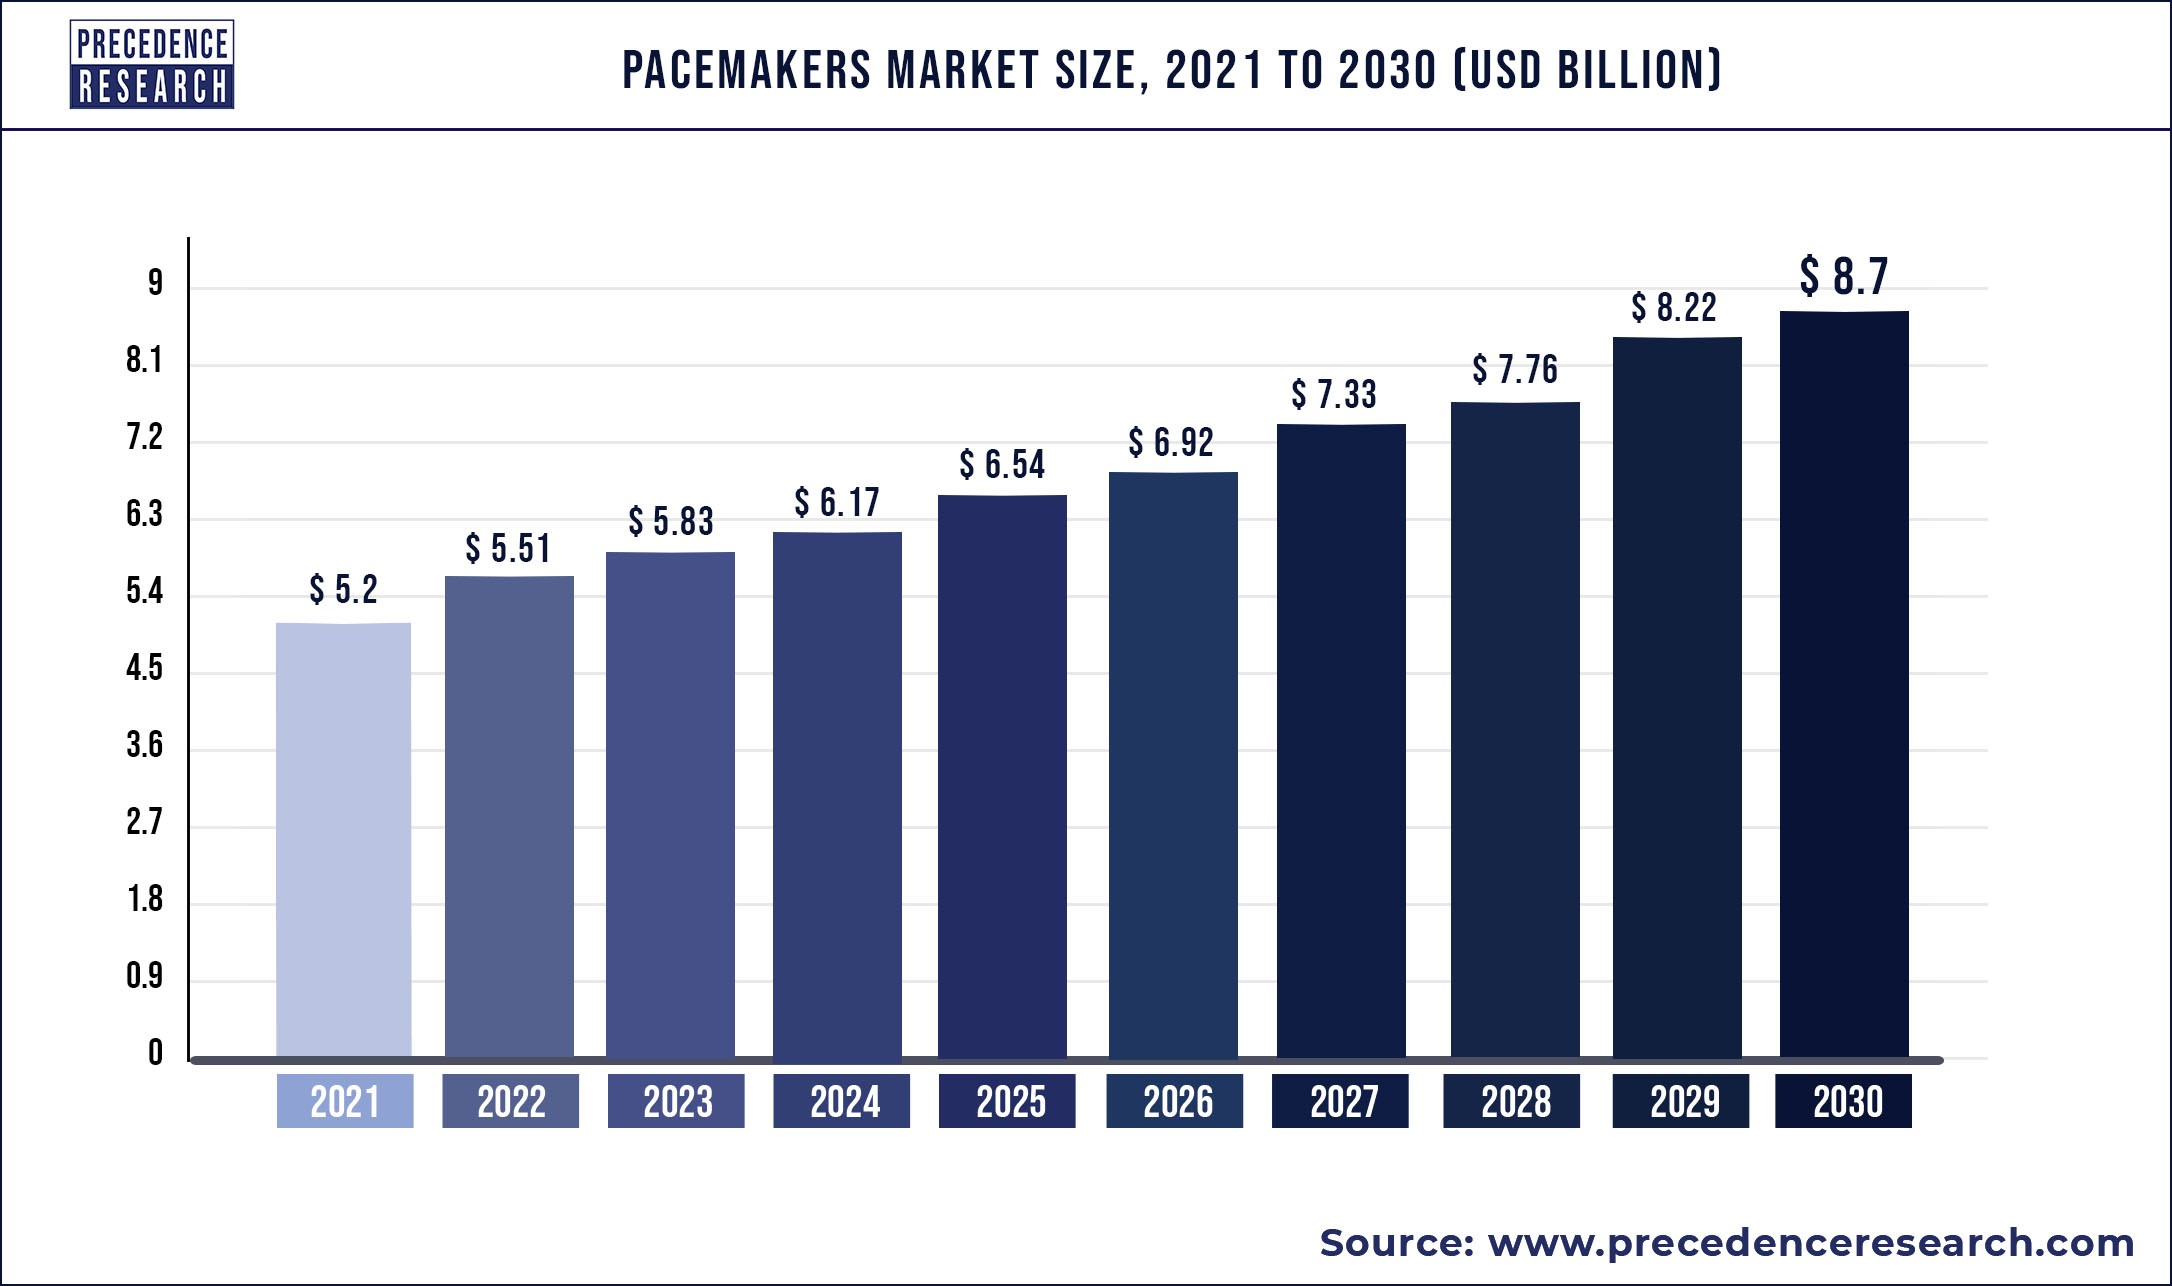 Pacemakers Market